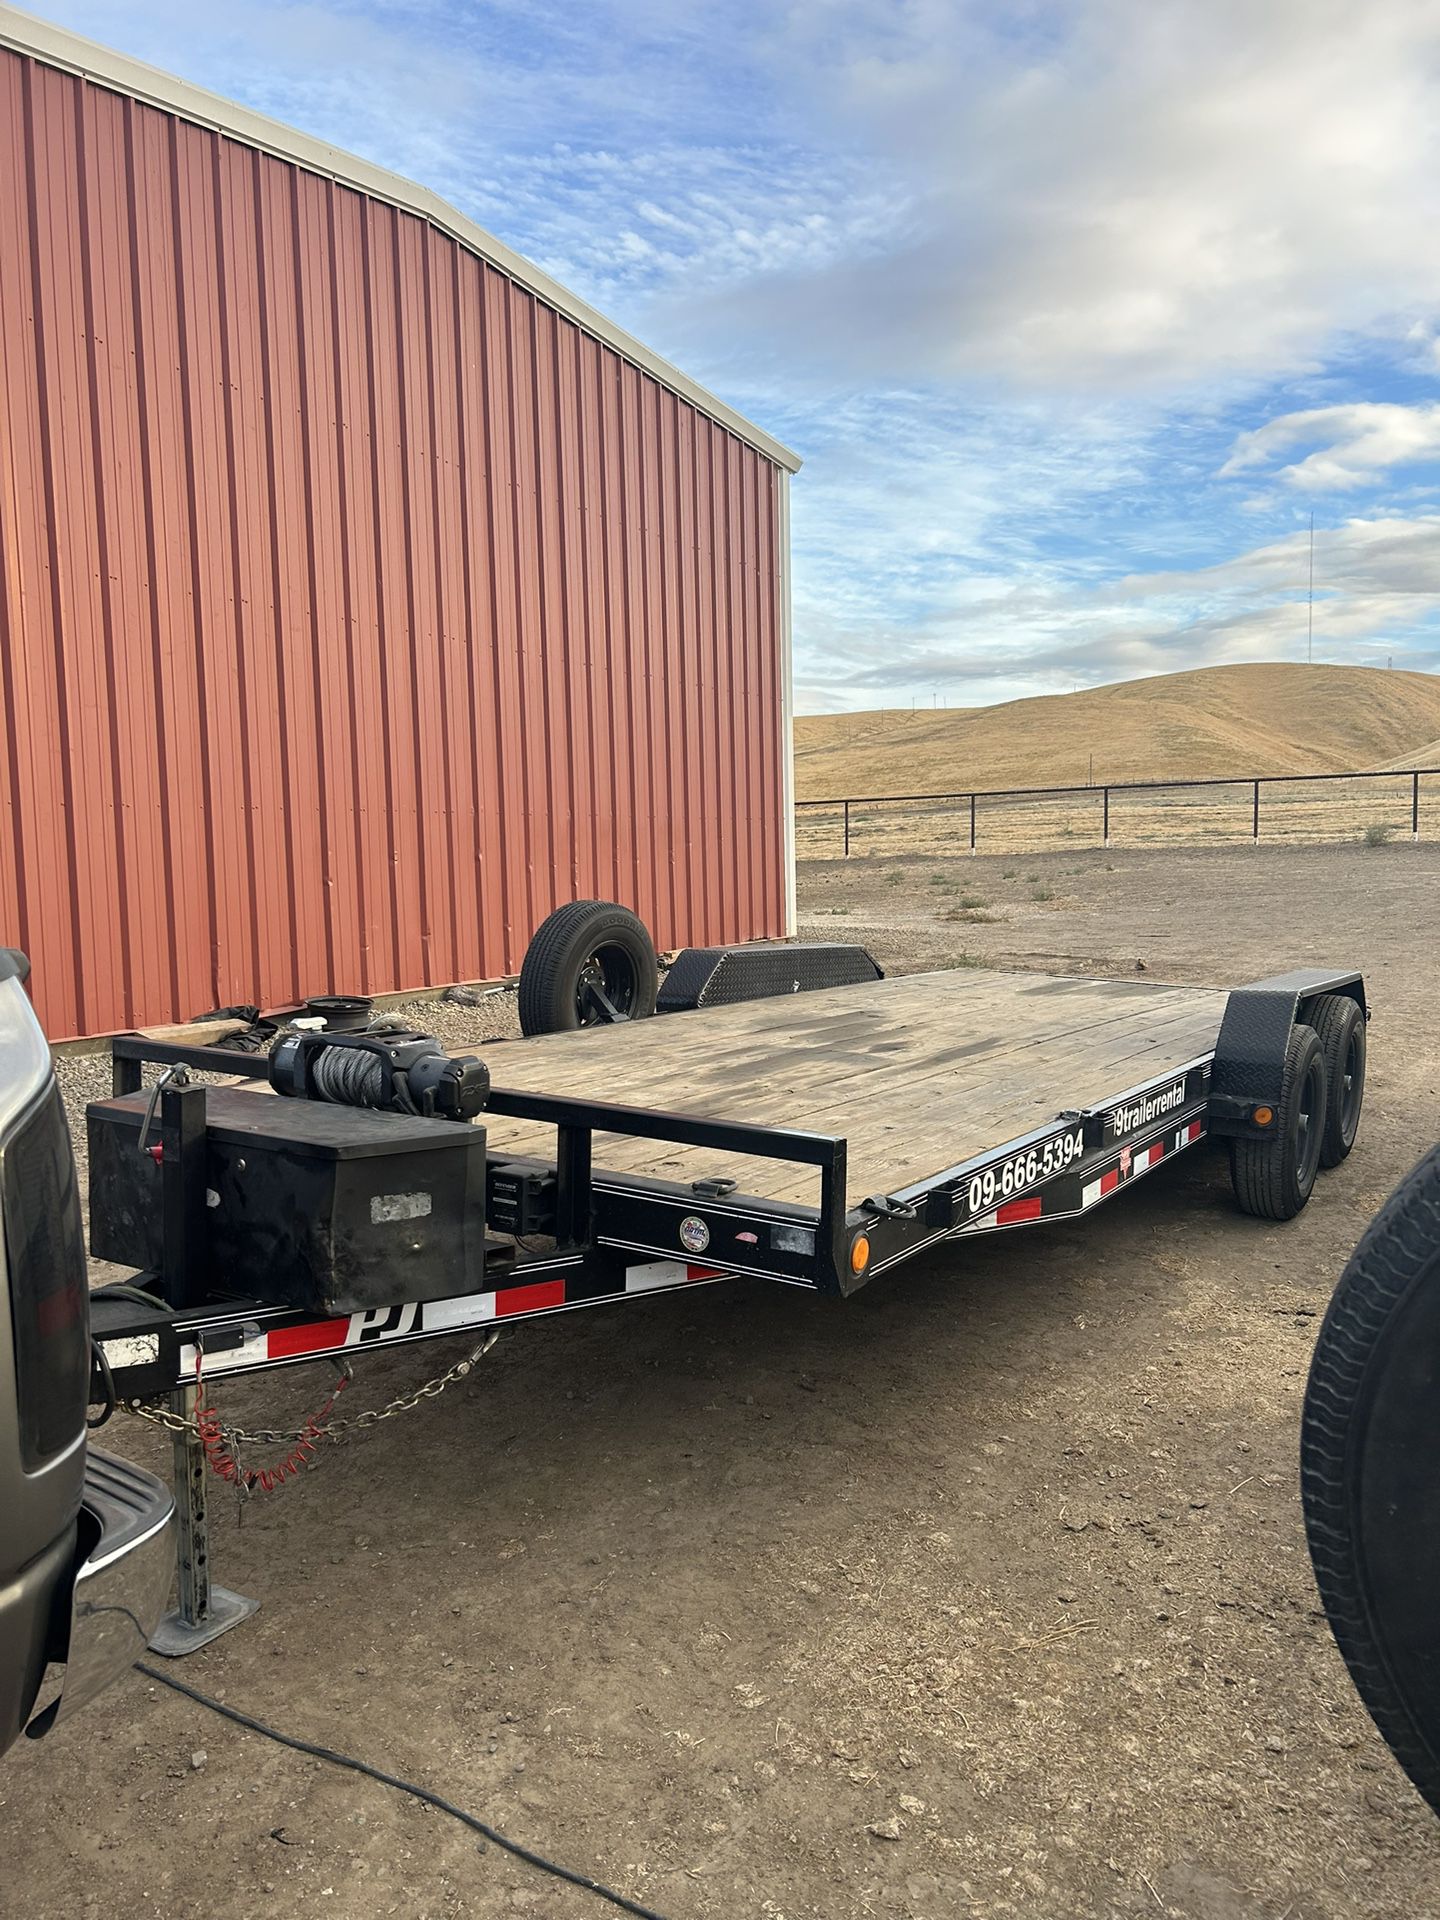 20ft Car Hauler Trailer with winch, straps, ramps, spare